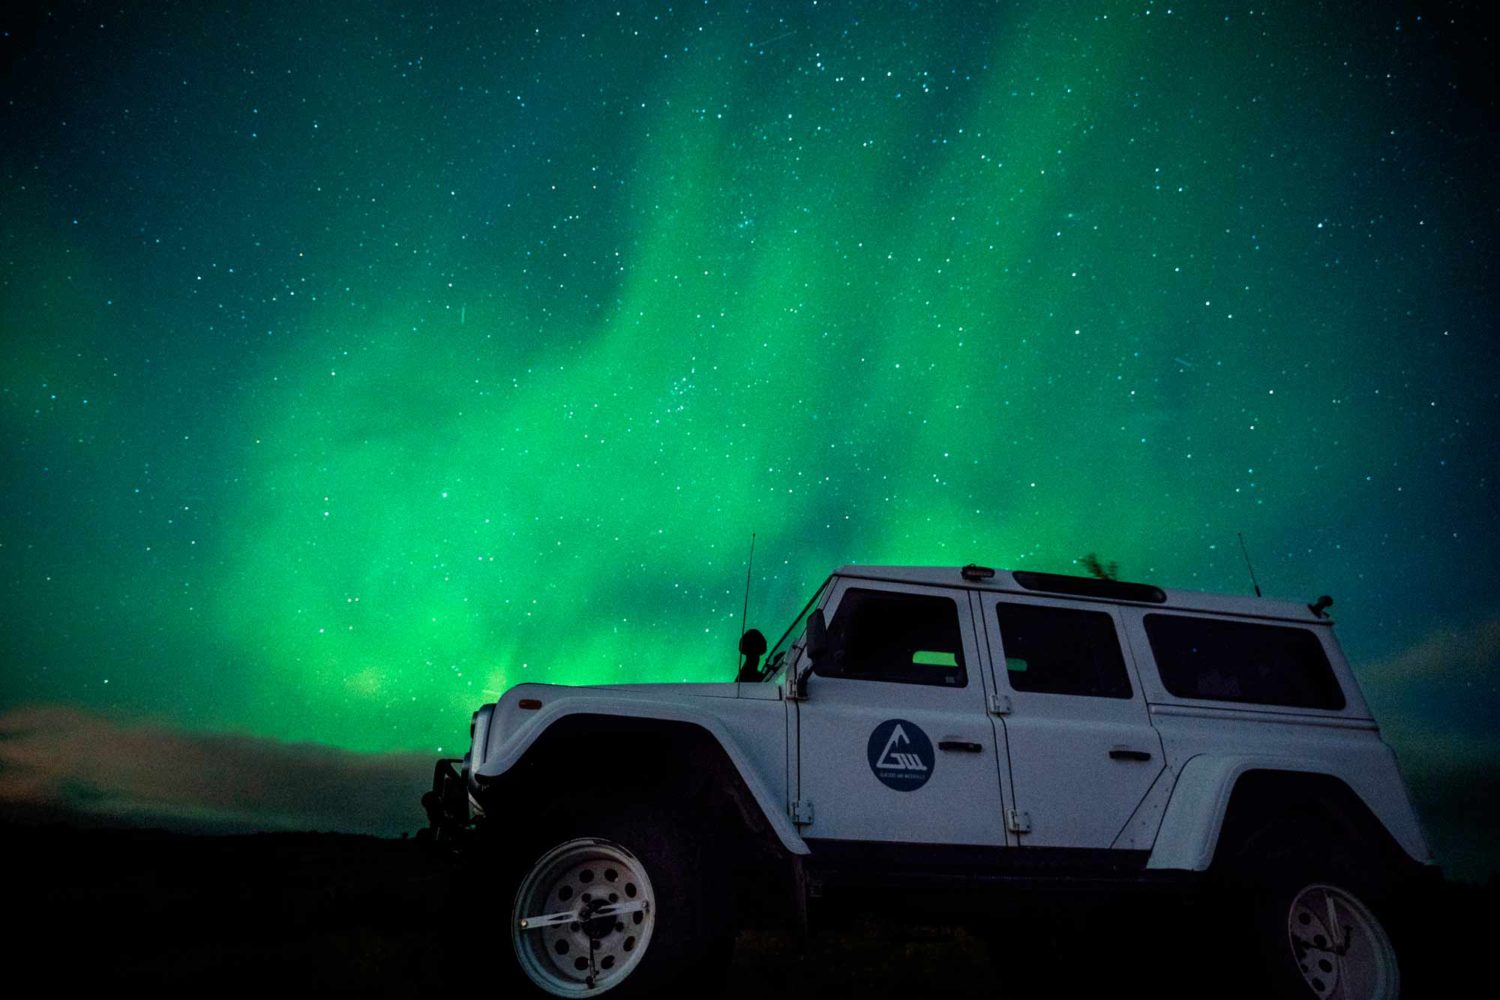 Modified Landrover and Northern Lights